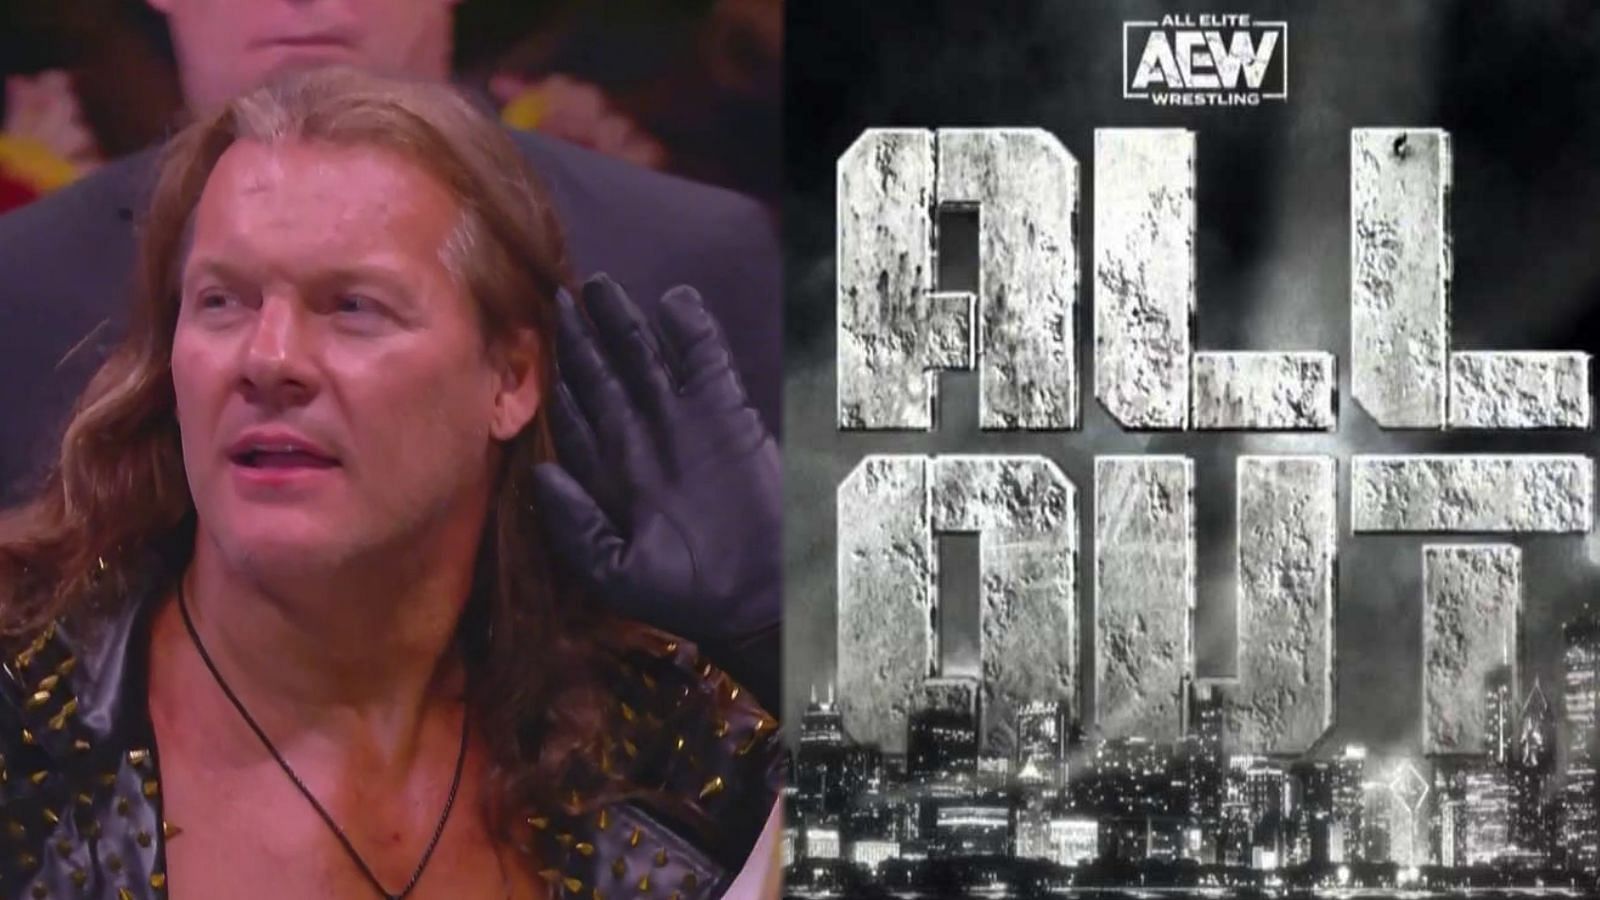 Jericho has proven his relevancy within AEW this year.